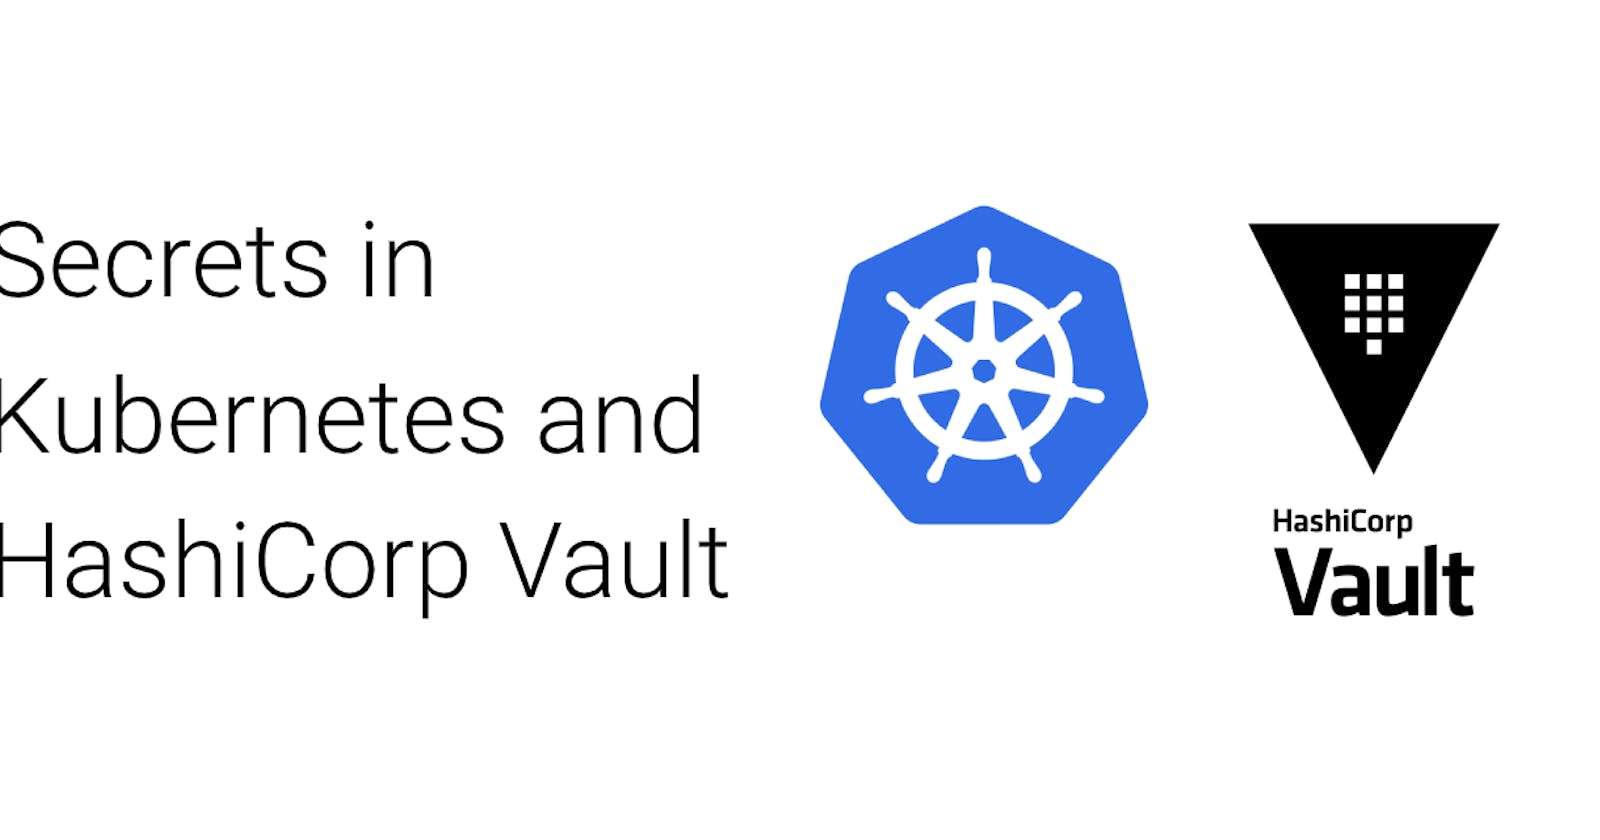 Secrets in Kubernetes and HashiCorp Vault